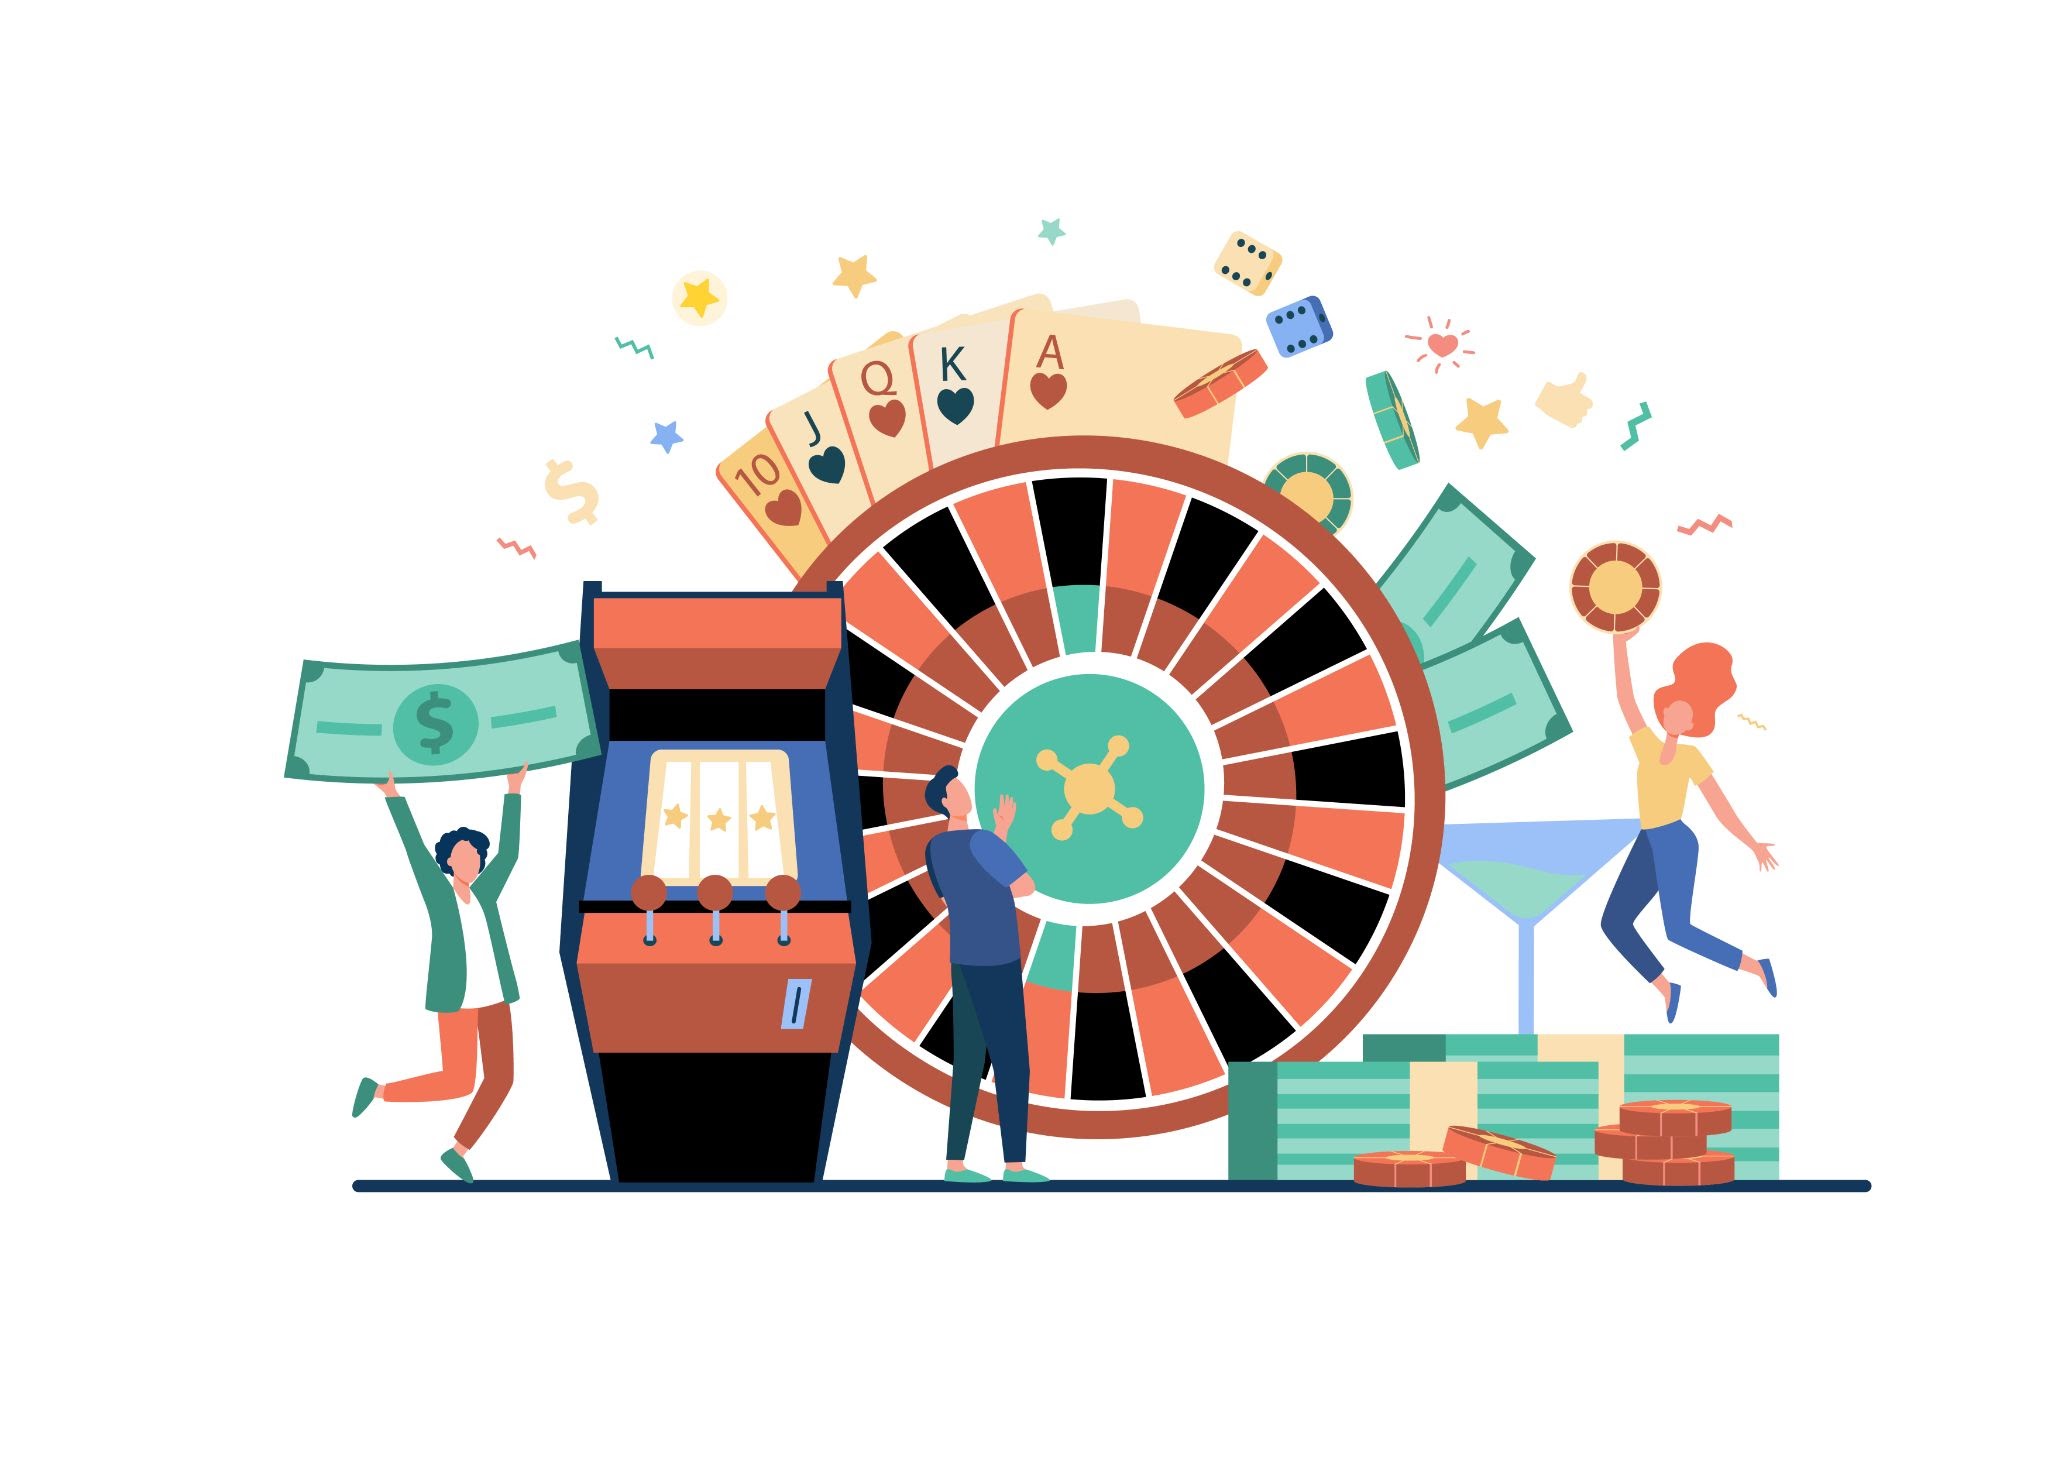 Colorful illustration of people engaging with various online gambling elements like a slot machine, roulette, casino chips, and currency, symbolizing fun and entertainment in a gaming environment.